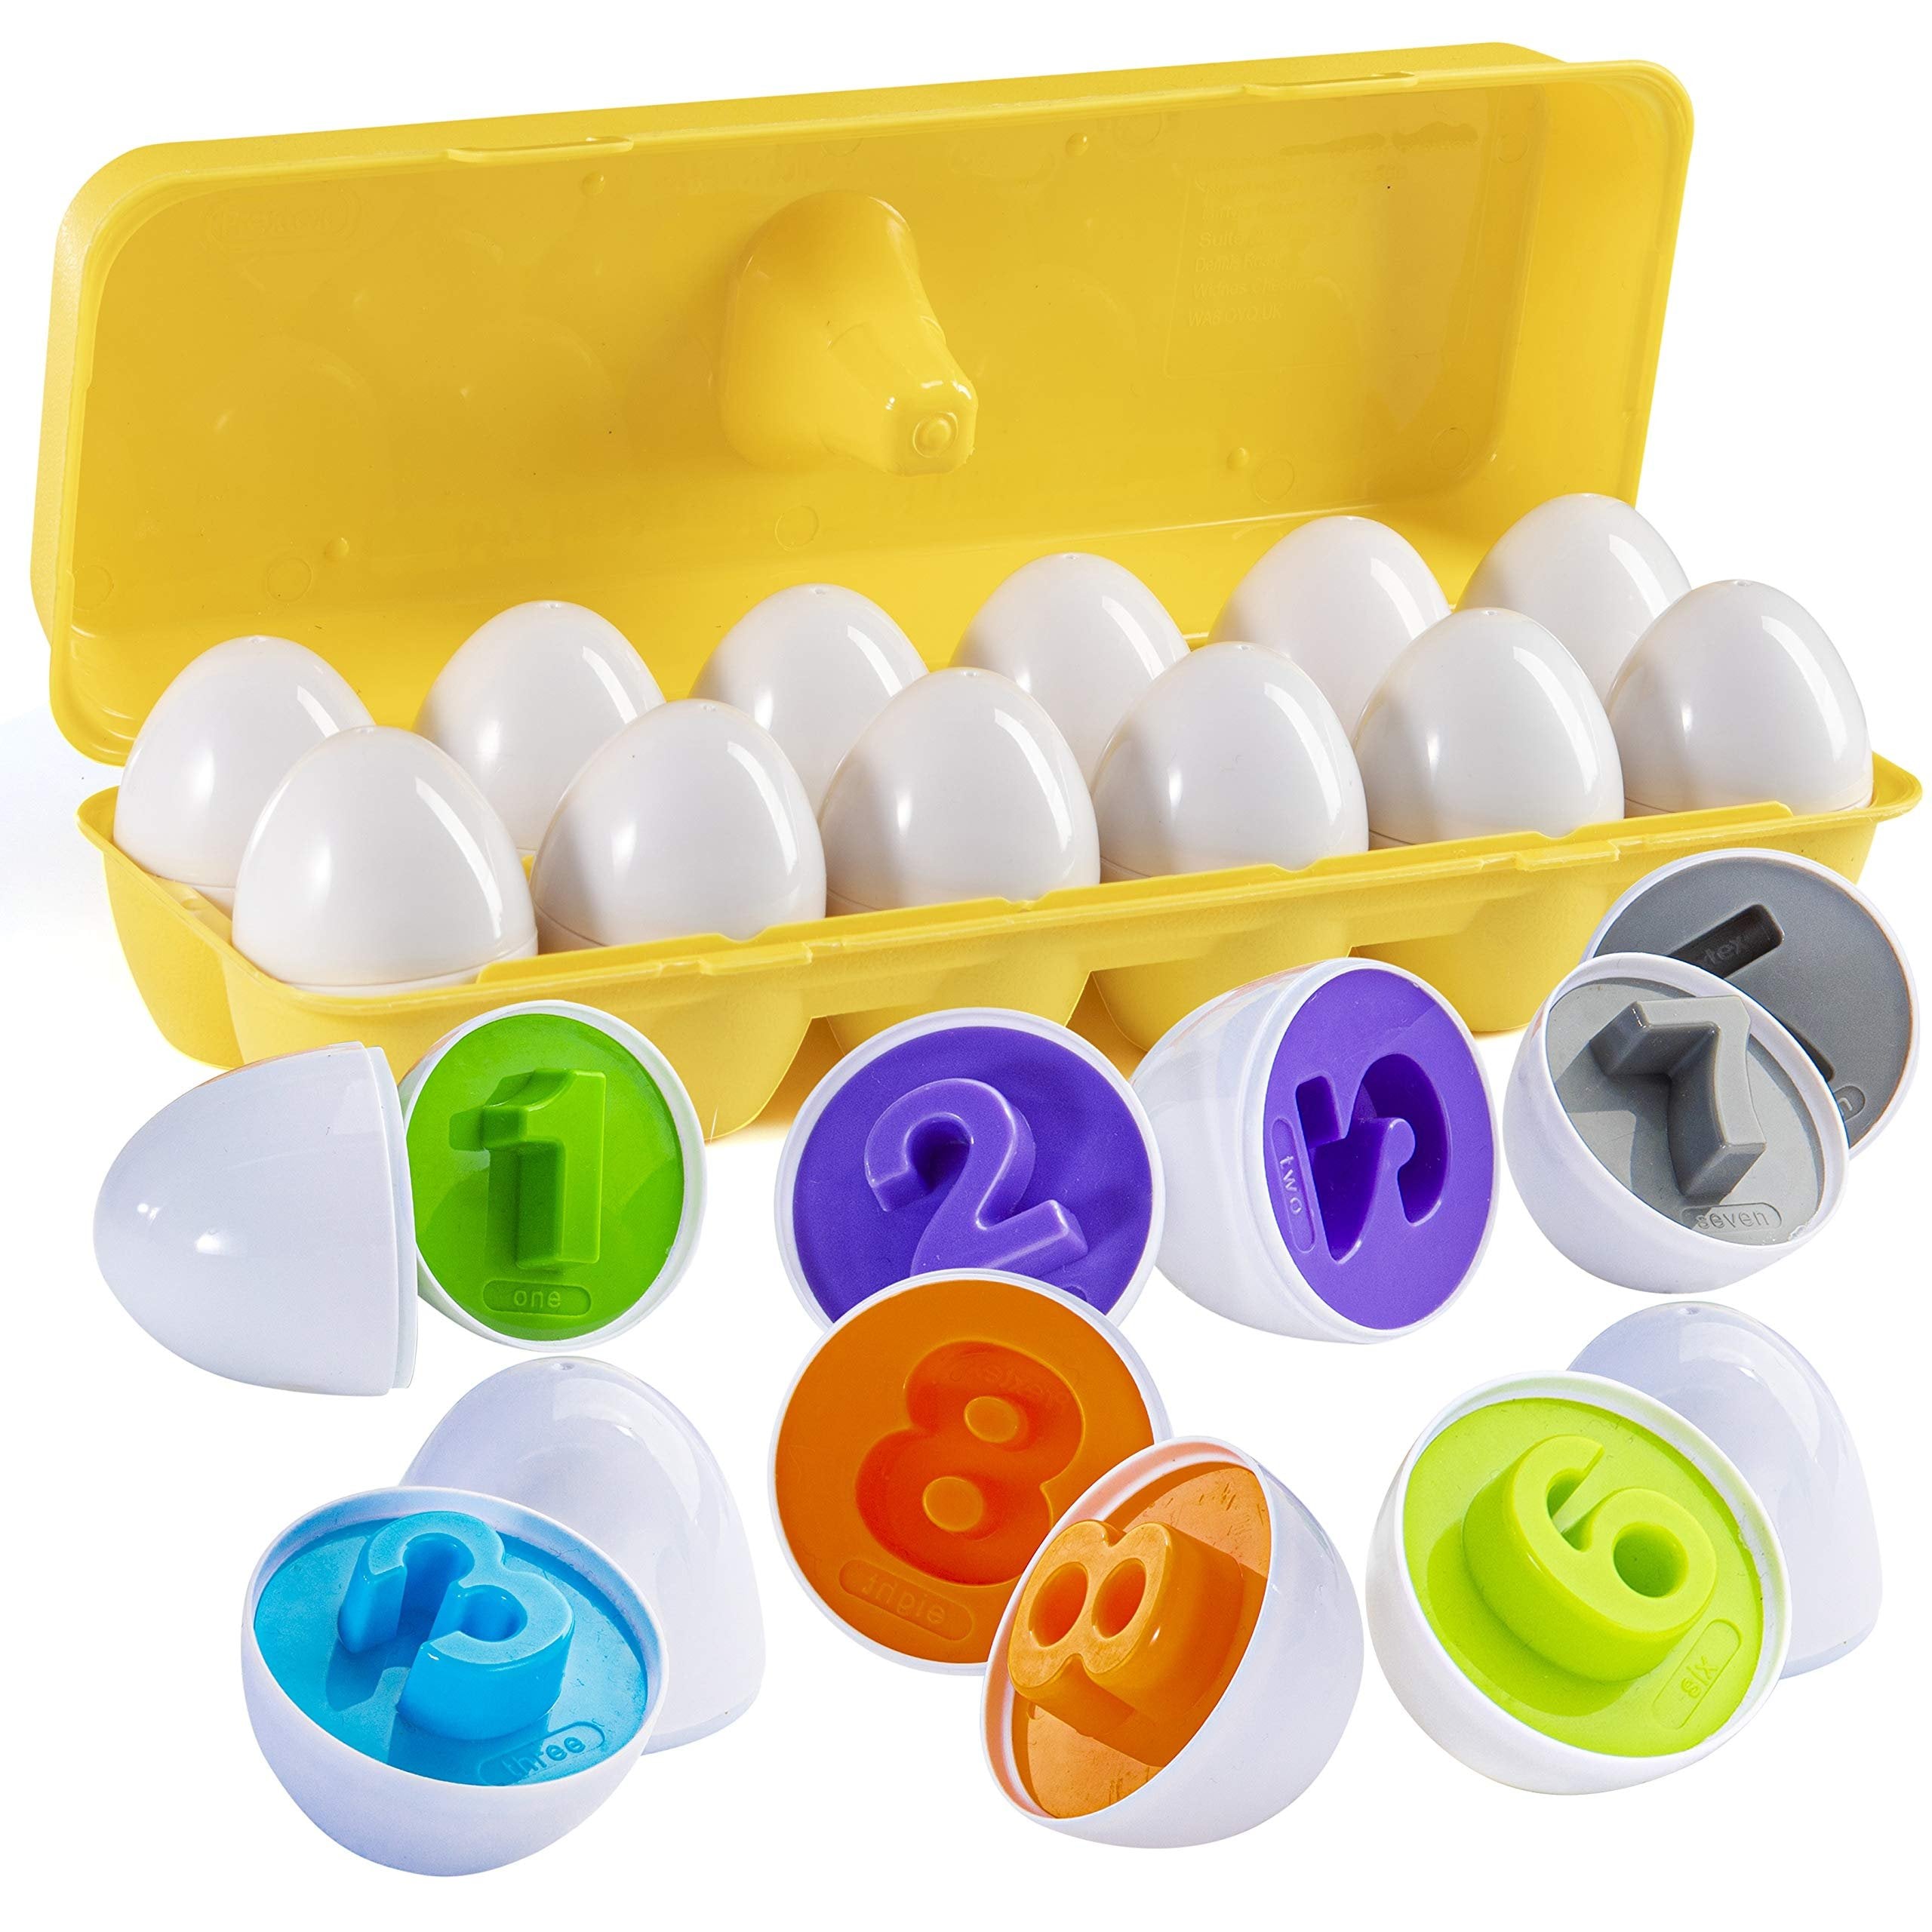 PREXTEX Find and Match Number Matching Easter Eggs with Yellow Holder - Matching Toy Eggs for Toddlers - STEM Toys Educational for Kids and Toddlers Montessori Toy Numbers, Shapes, and Colors